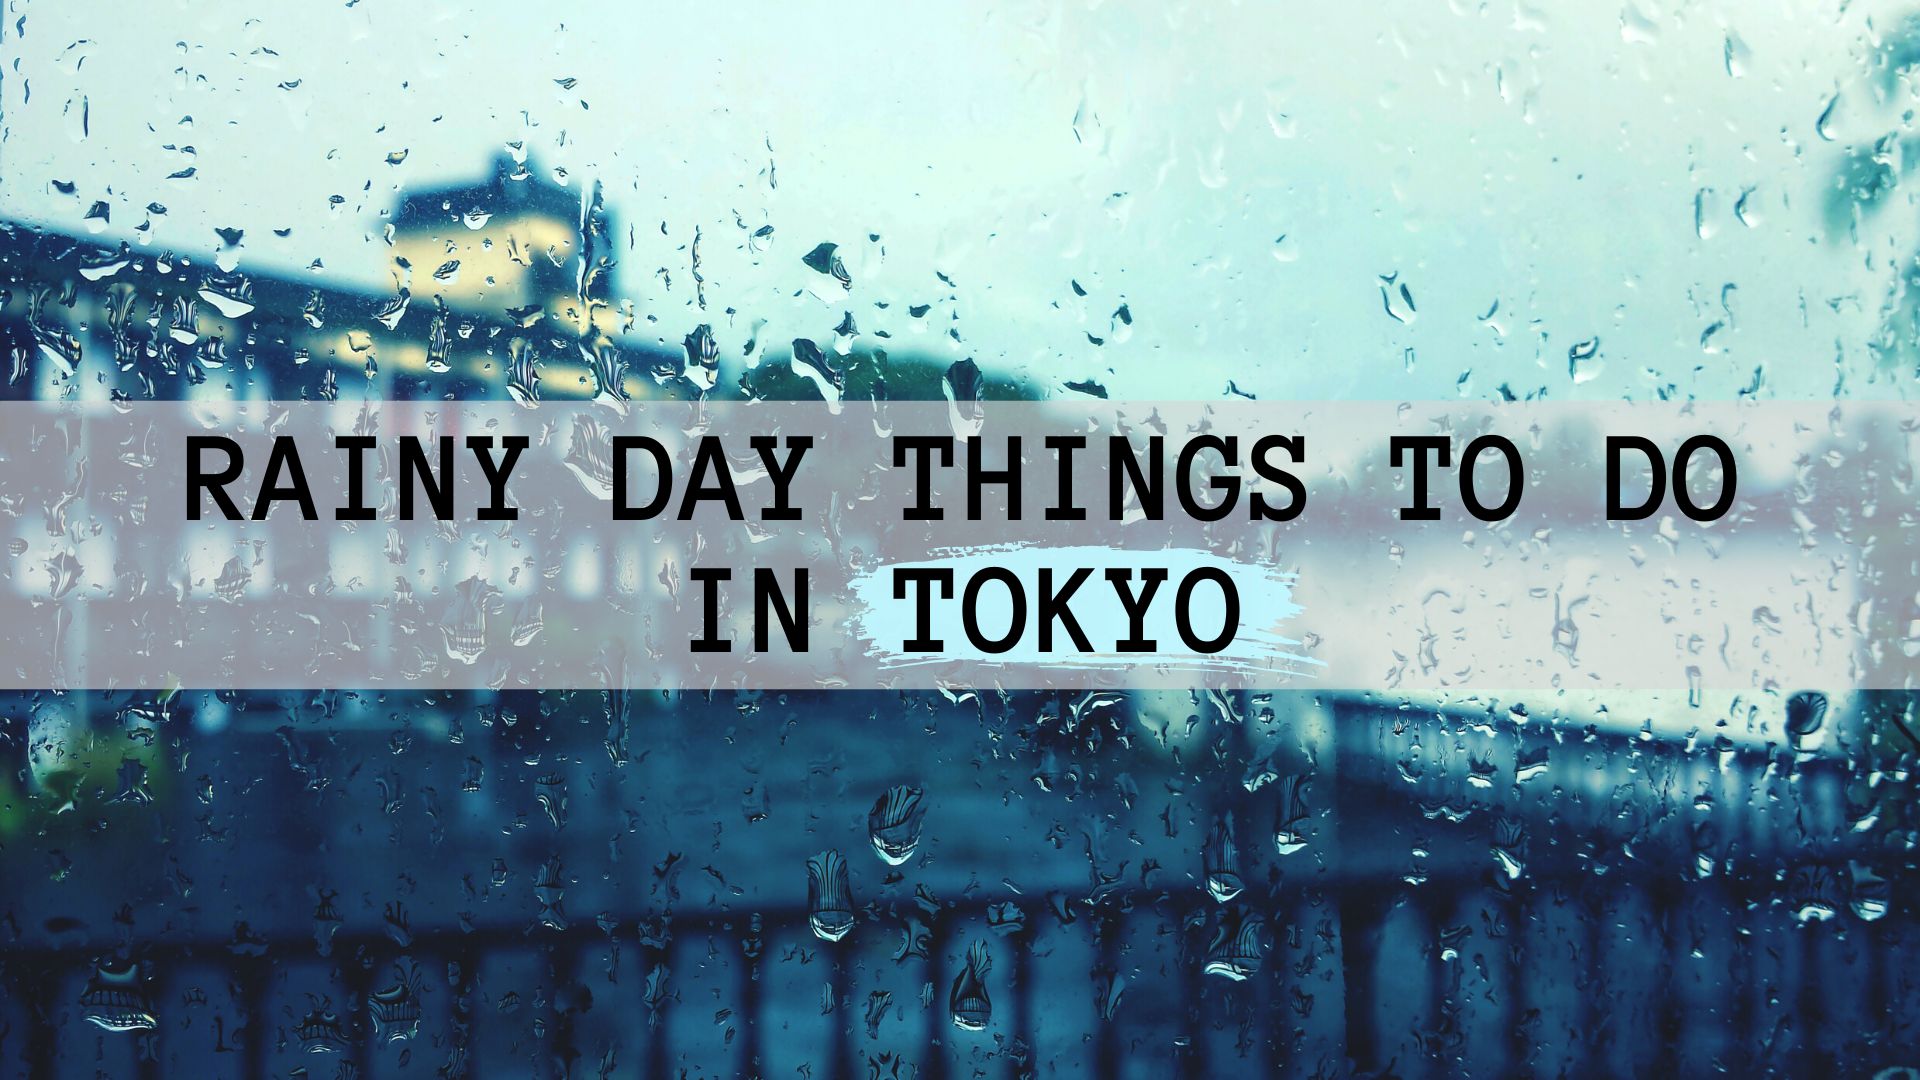 Tokyo station, rainy day things to do in Tokyo, Tokyo rainy day activities cover